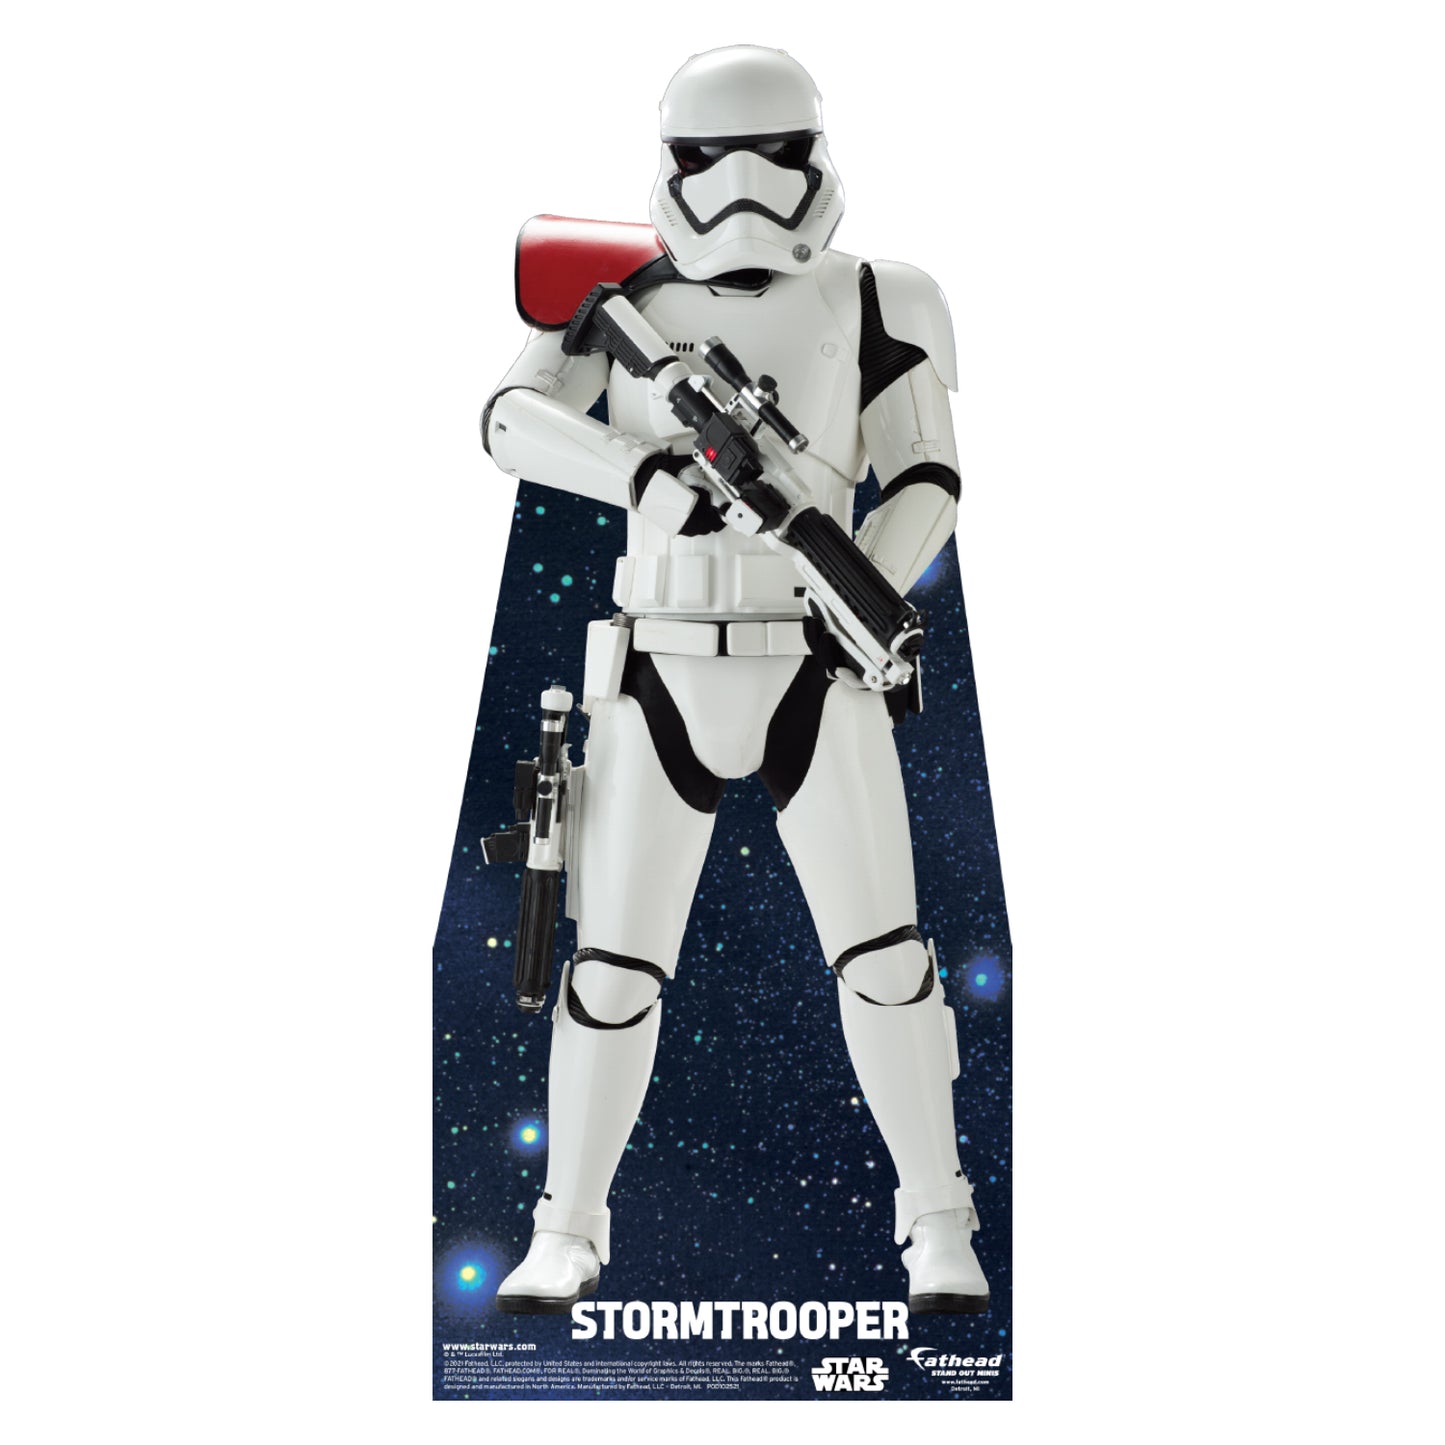 Sequel Trilogy: Stormtrooper Episode VII Mini Cardstock Cutout - Officially Licensed Star Wars Stand Out